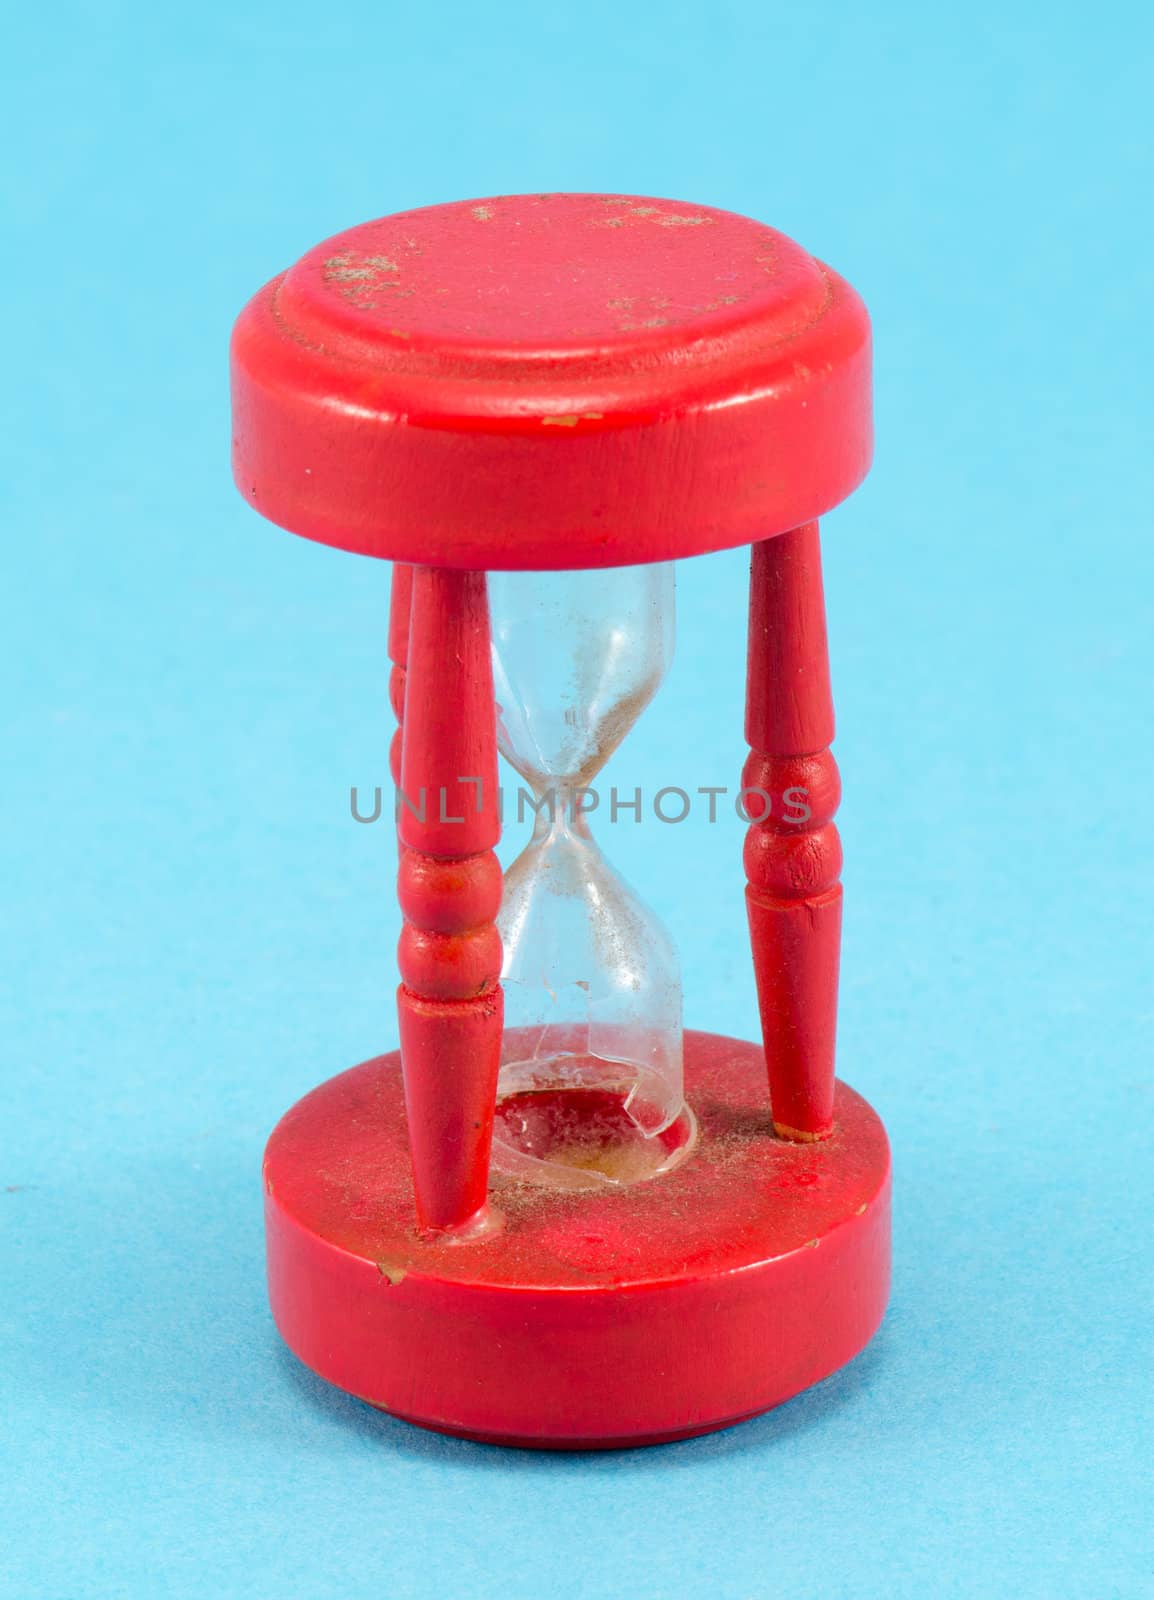 broken red retro object sand glass clock on blue background.